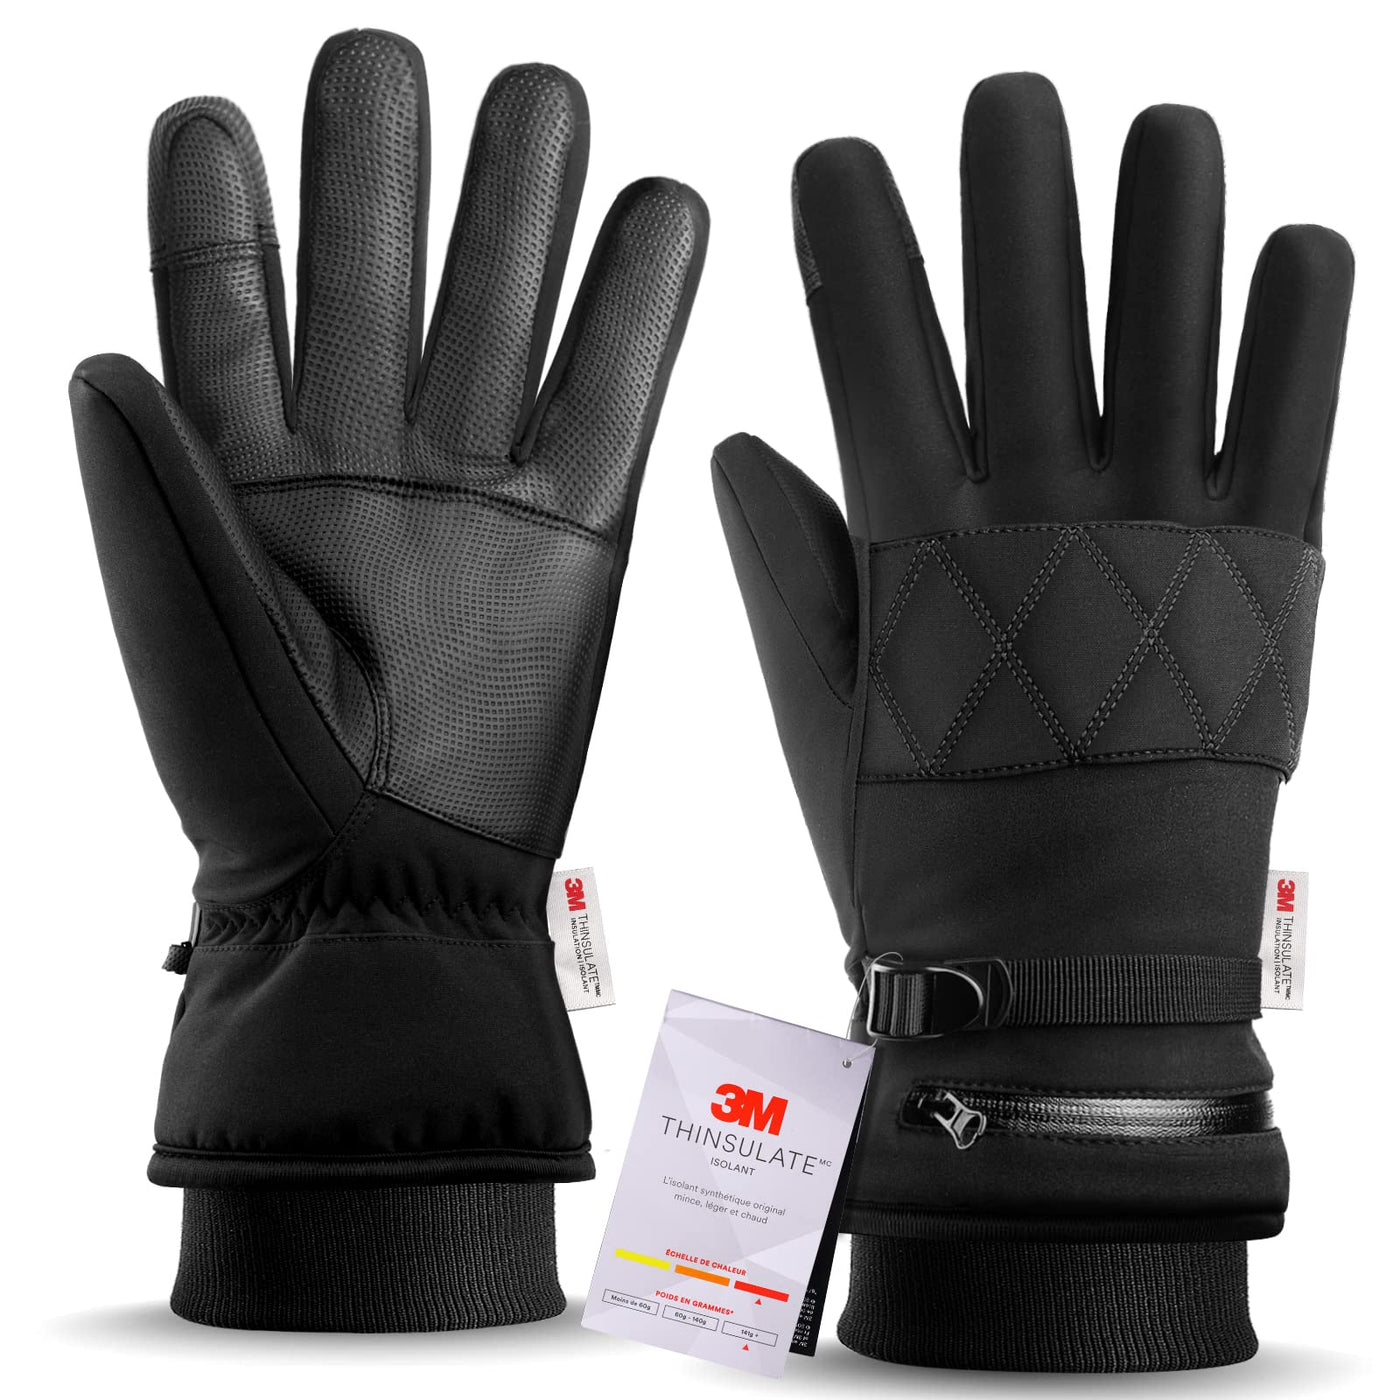 Flamino Winter Ski Gloves, Made with 3M Thinsulate Insulation